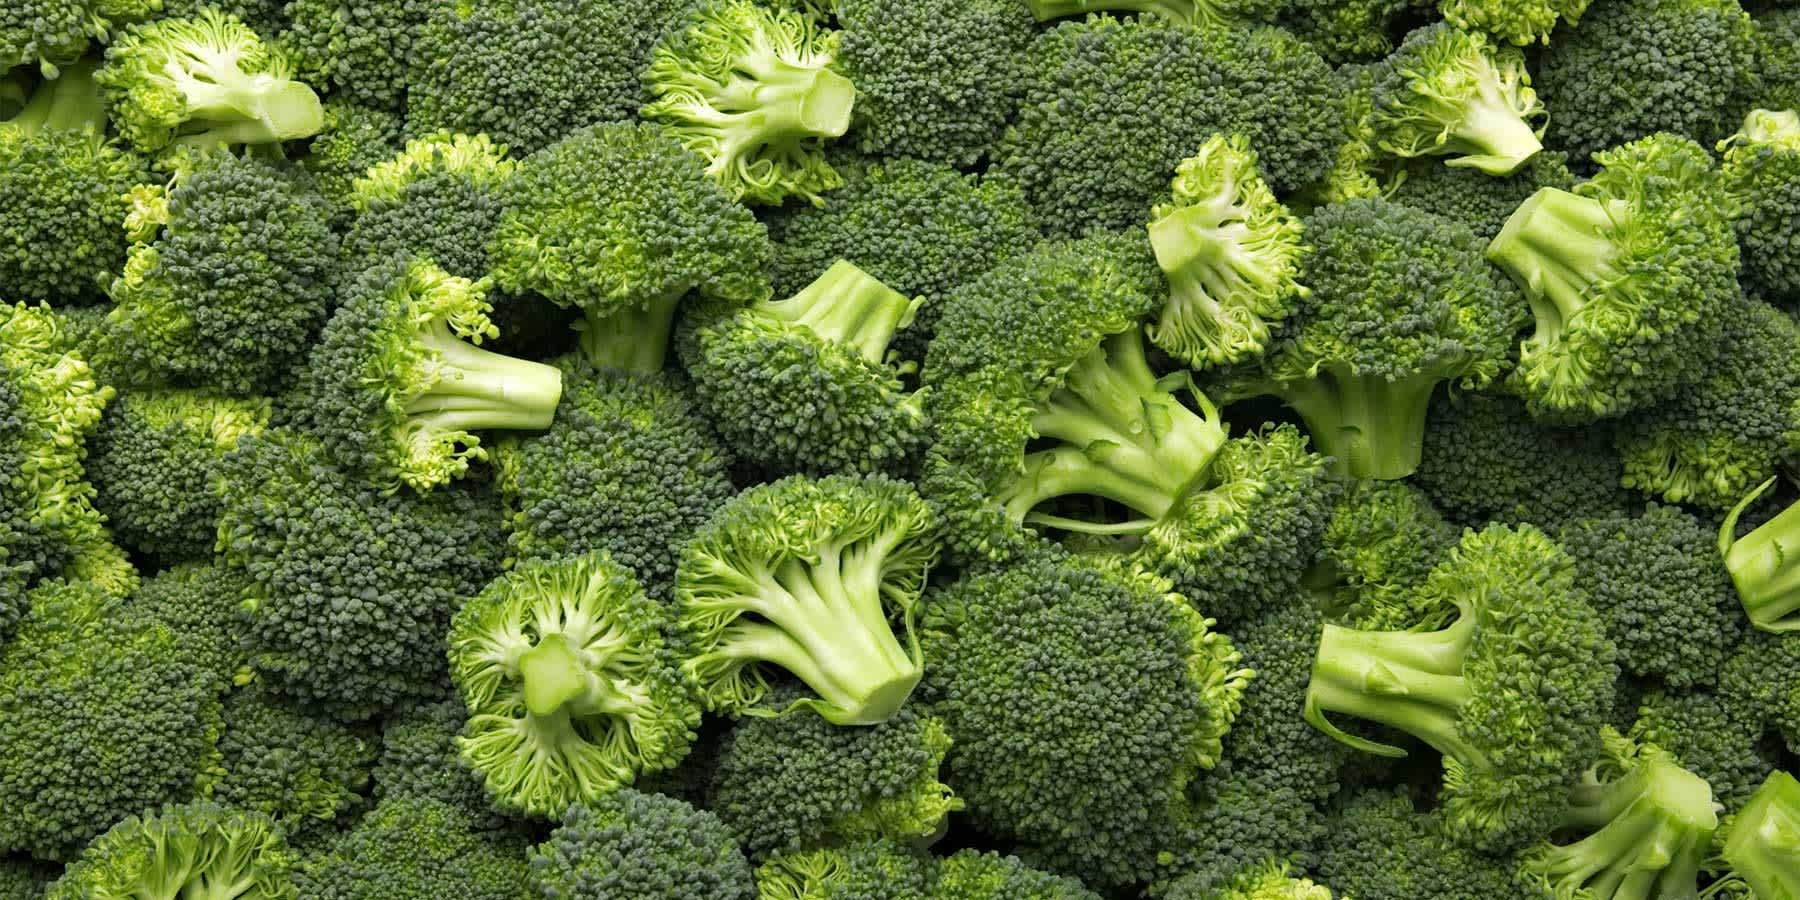 Picture of broccoli that can provide benefits of leafy greens